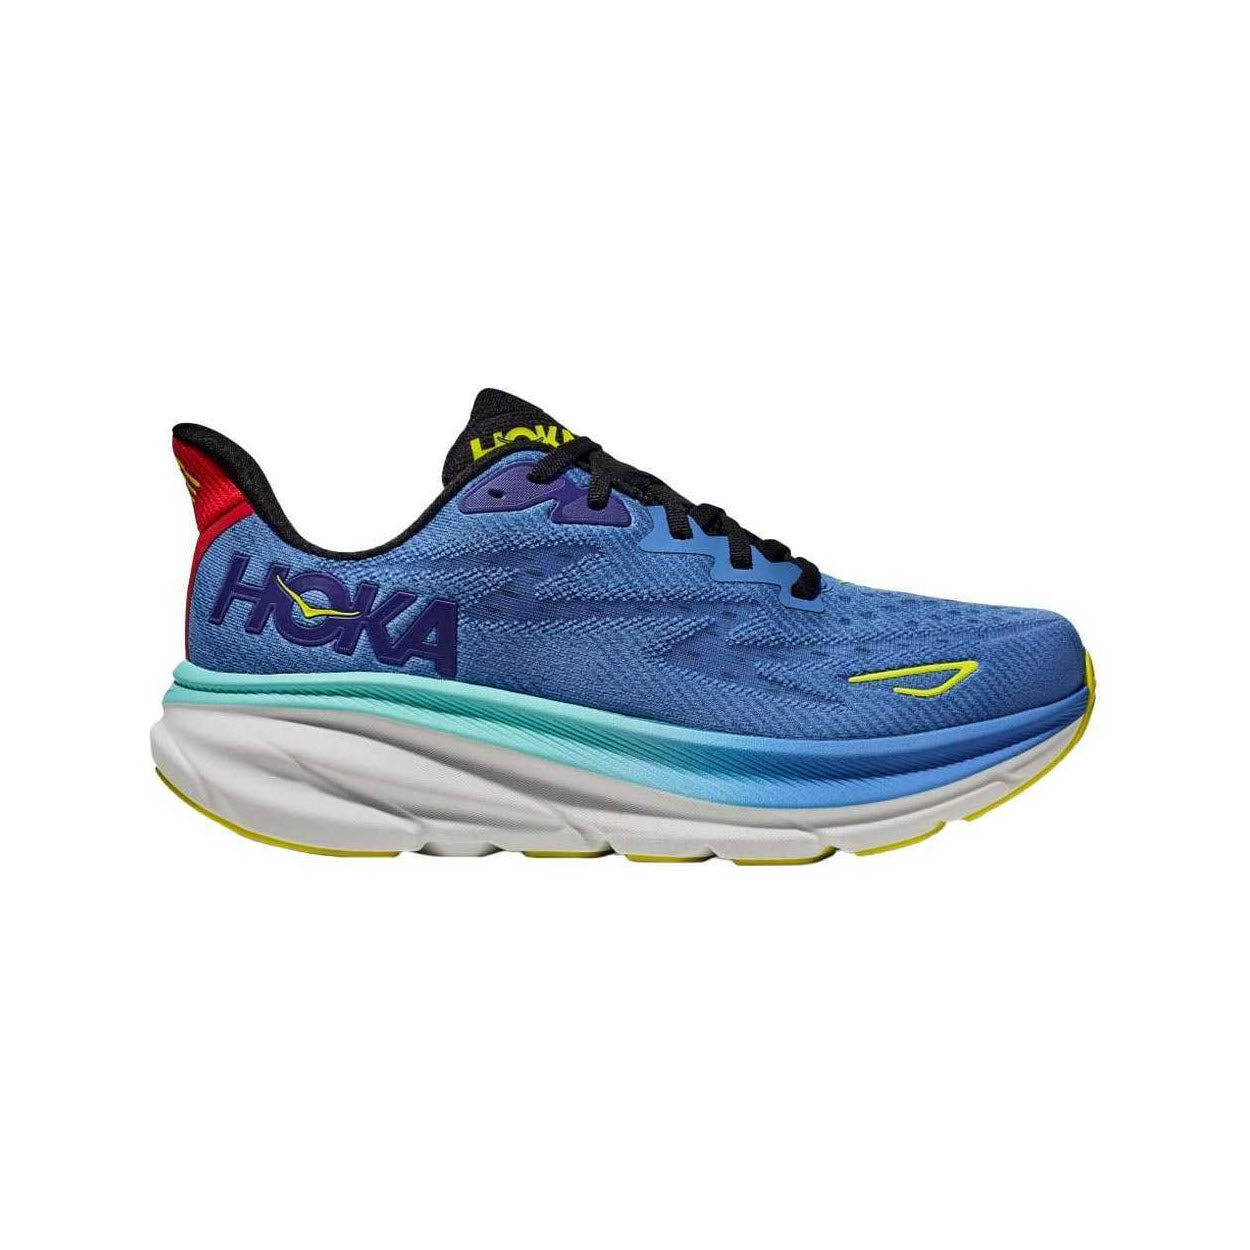 Blue and white HOKA Clifton 9 running shoe with teal accents and visible brand logos on side and heel.